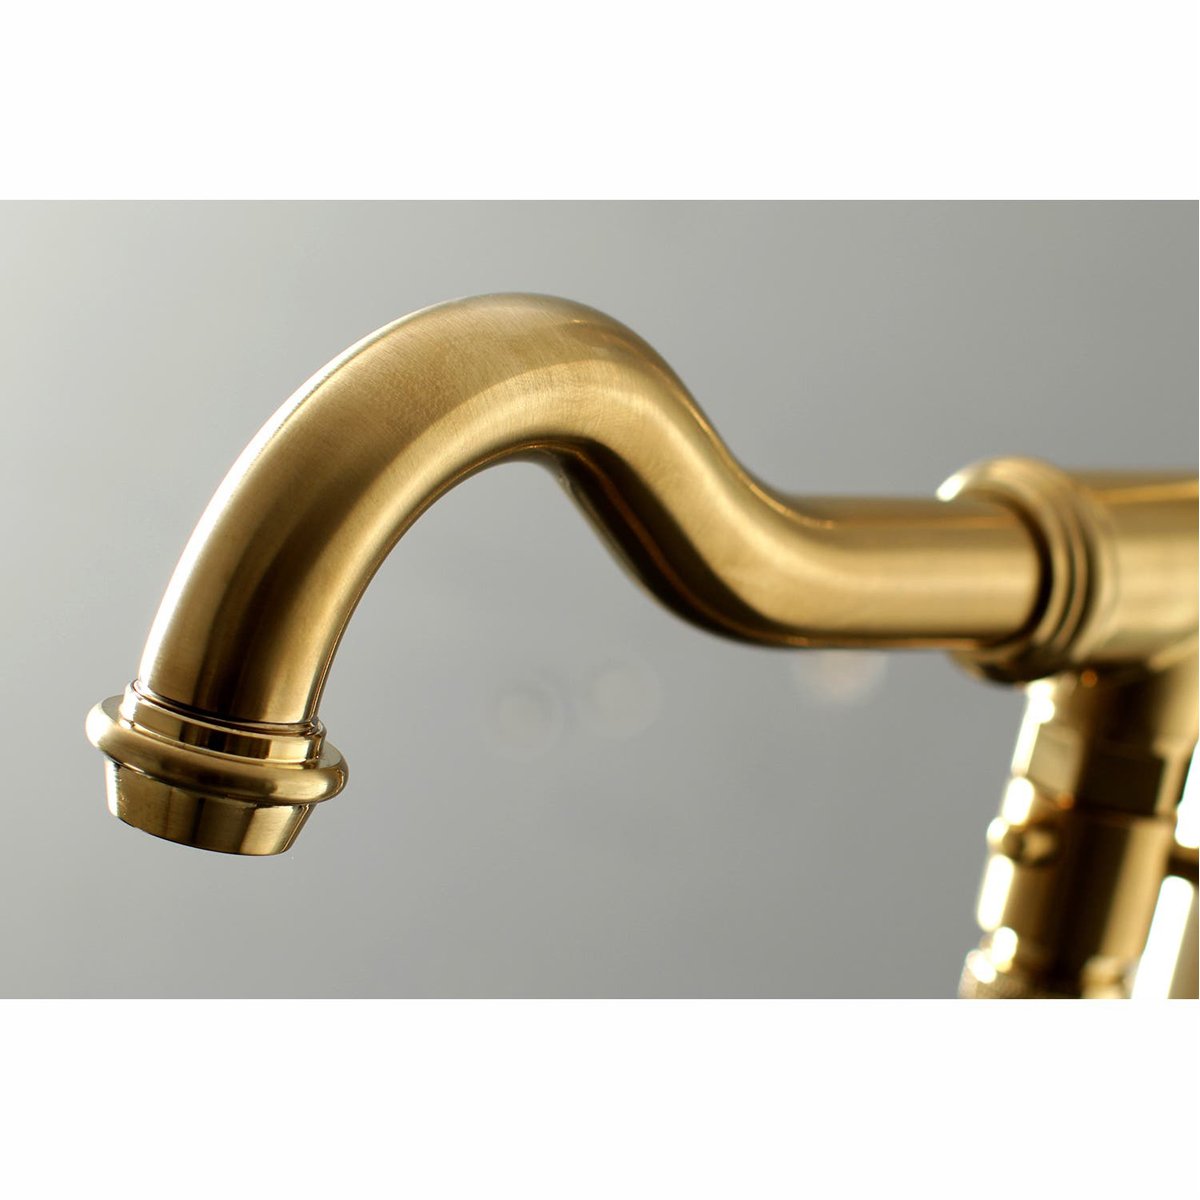 Kingston Brass English Country Single-Handle Freestanding Roman Tub Filler with Hand Shower